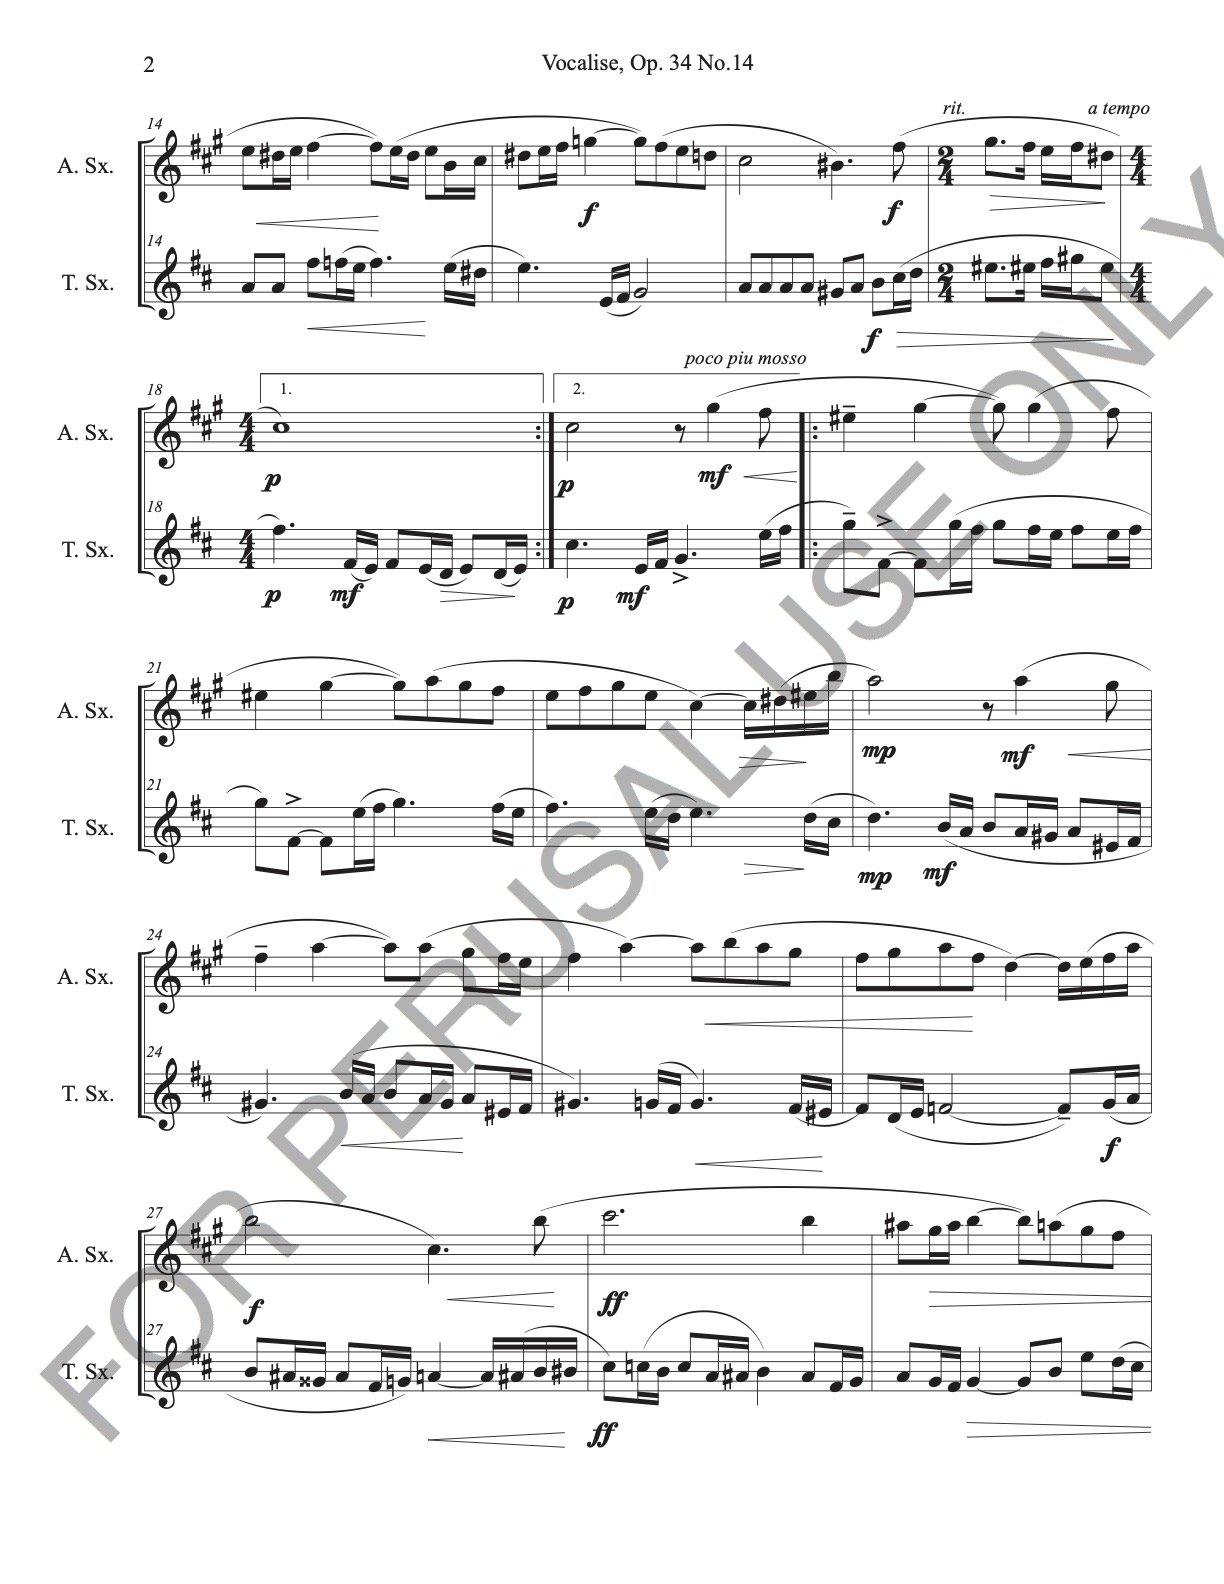 Vocalise, Op. 34 no.14 by Sergei Rachmaninoff for Alto and Tenor Sax Duet (score+parts) - ChaipruckMekara